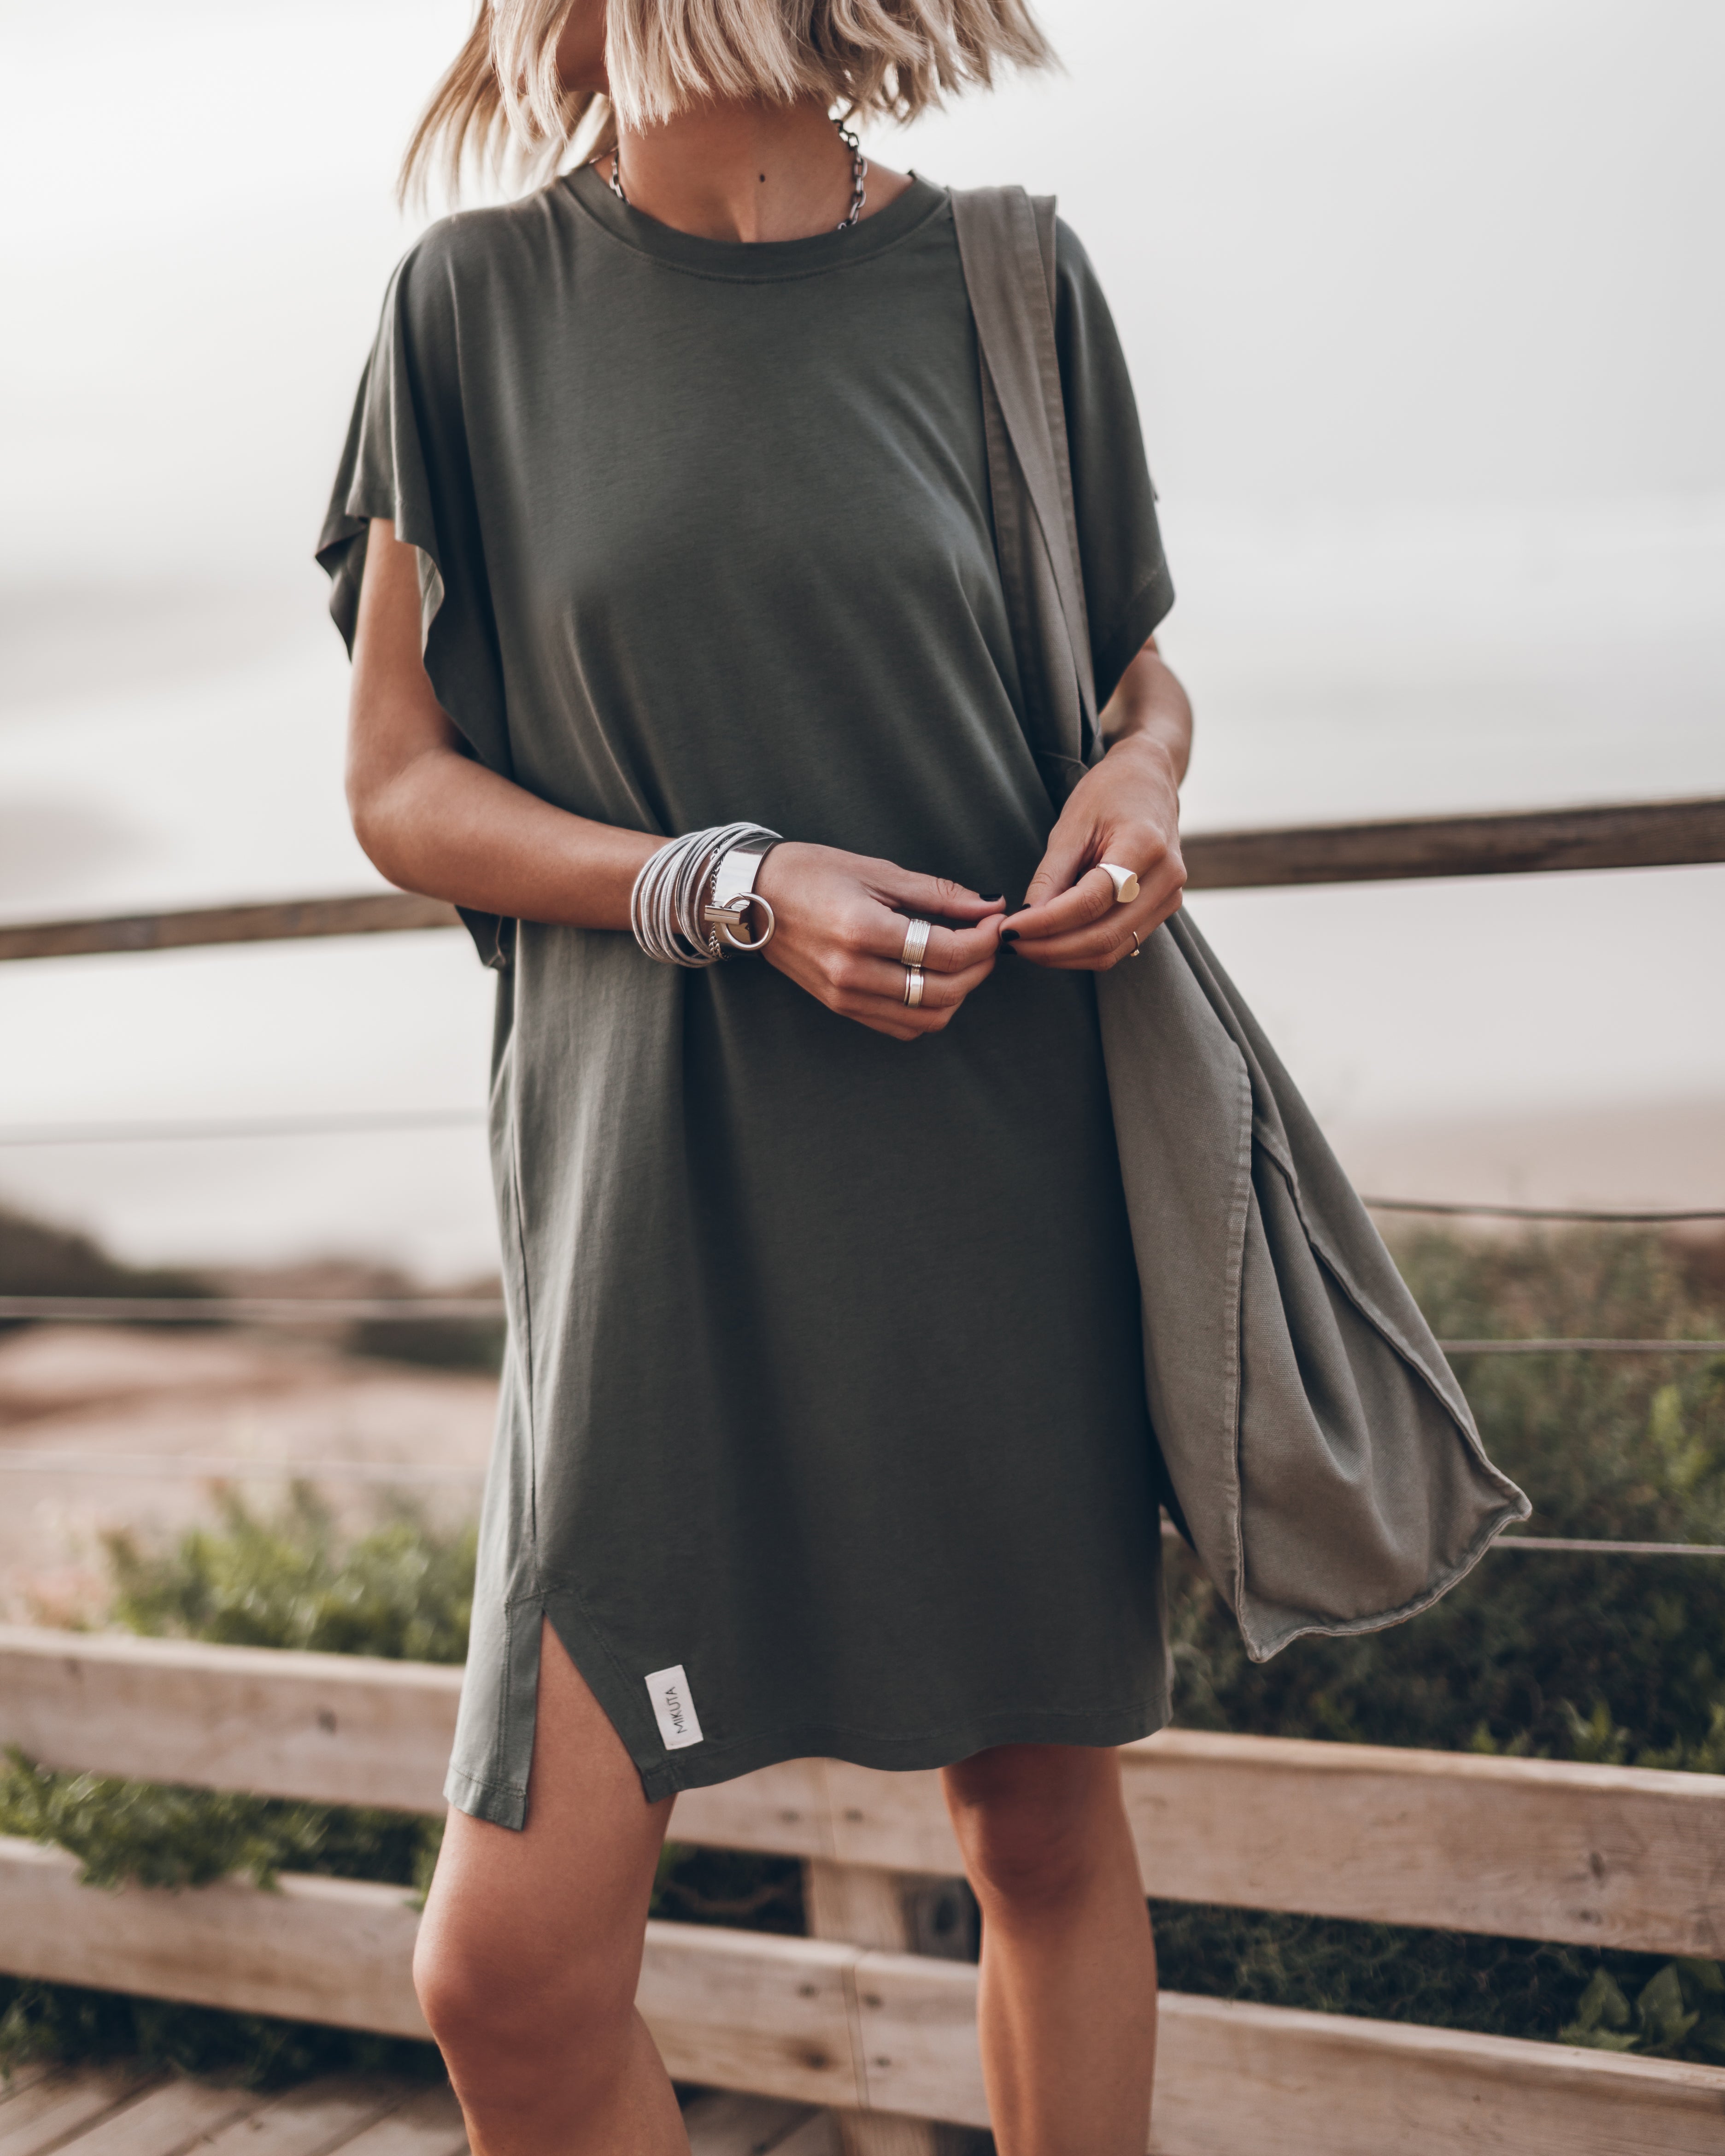 The Olive Short Batwing Dress